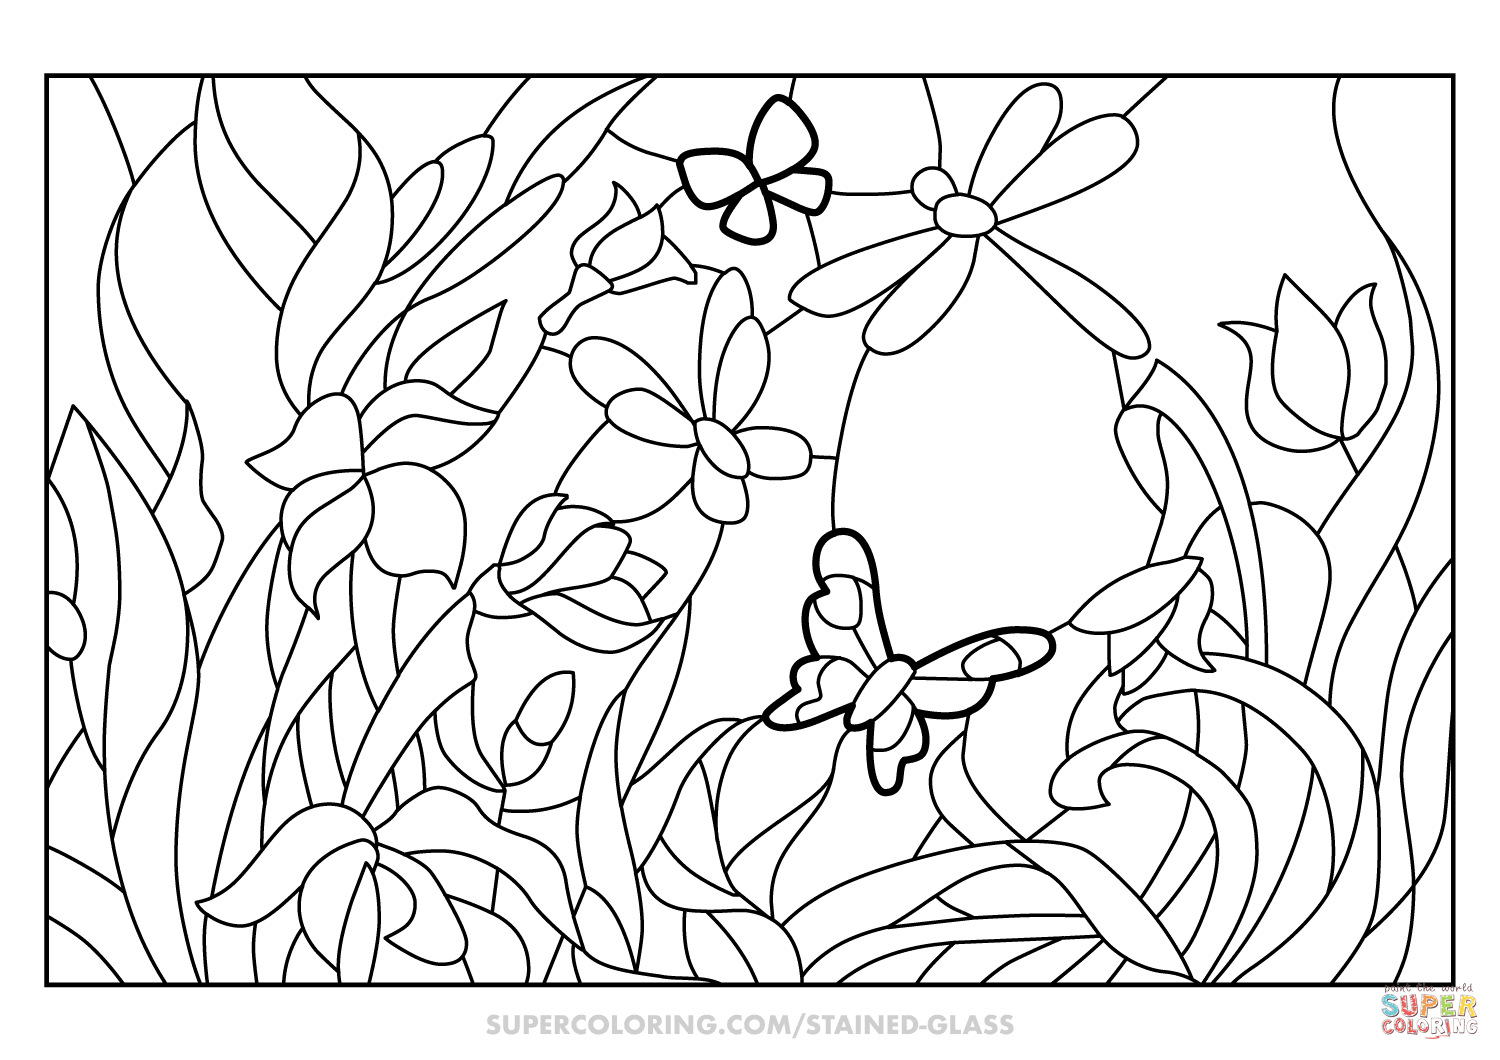 Flower garden stained glass coloring page free printable coloring pages stained glass flowers stained glass patterns free stained glass butterfly